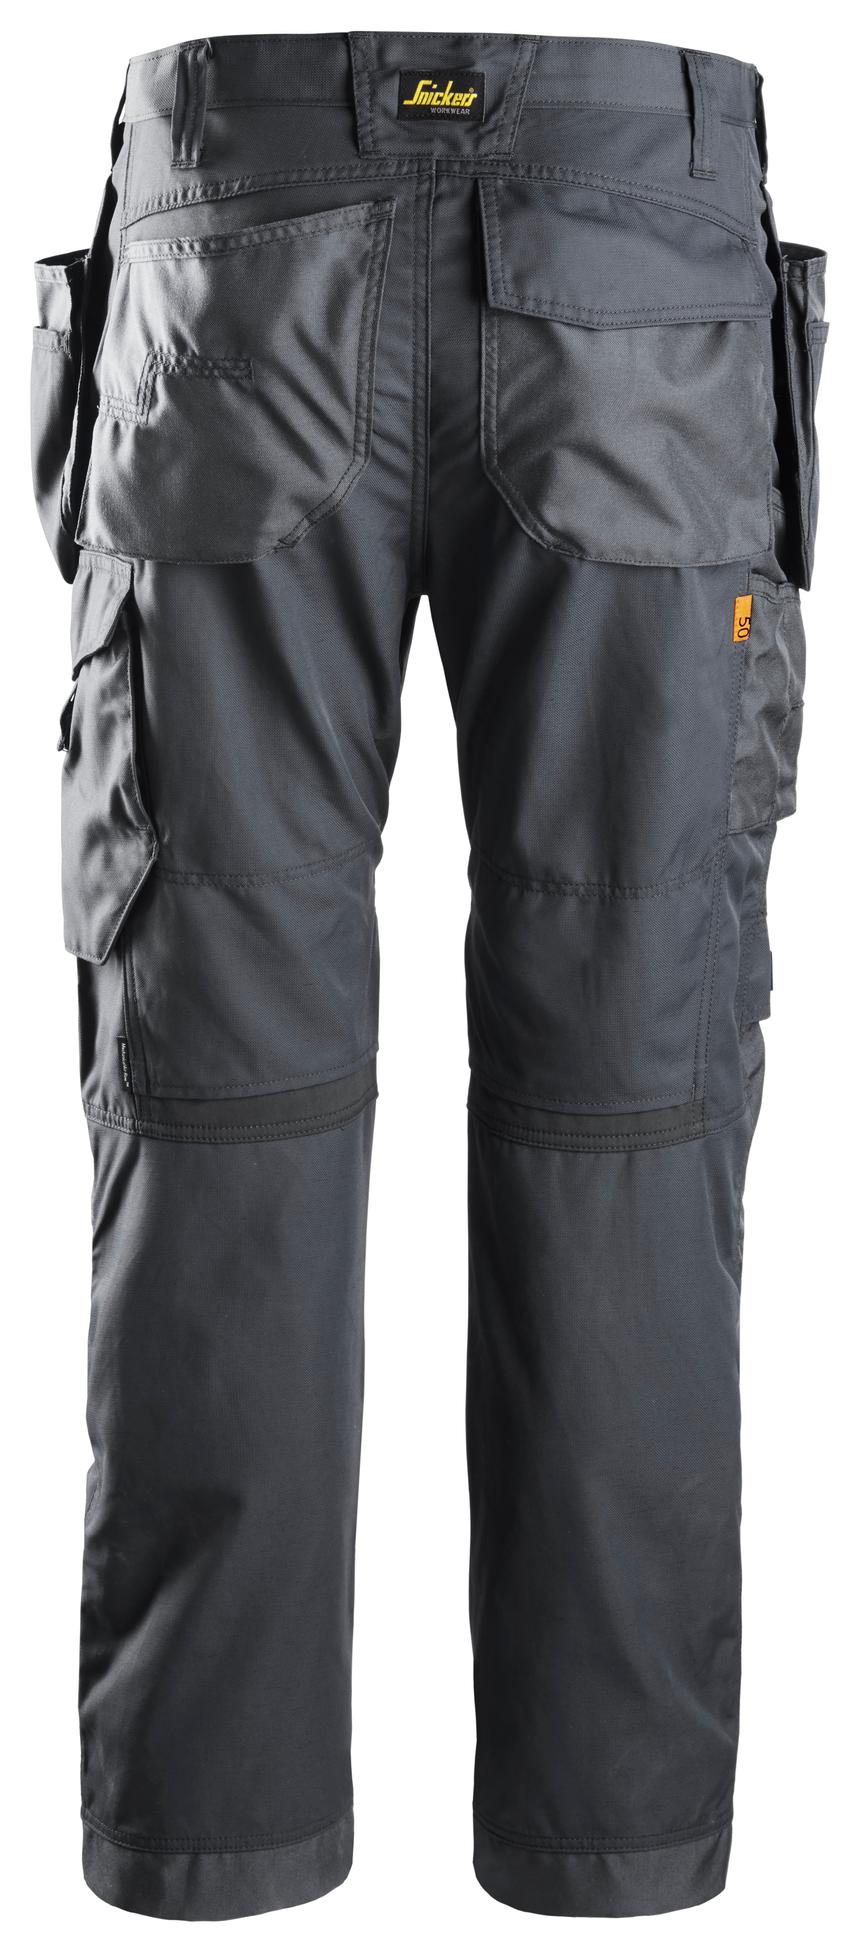 Snickers 6590 AllroundWork Capsulized Stretch Trousers Holster Pockets